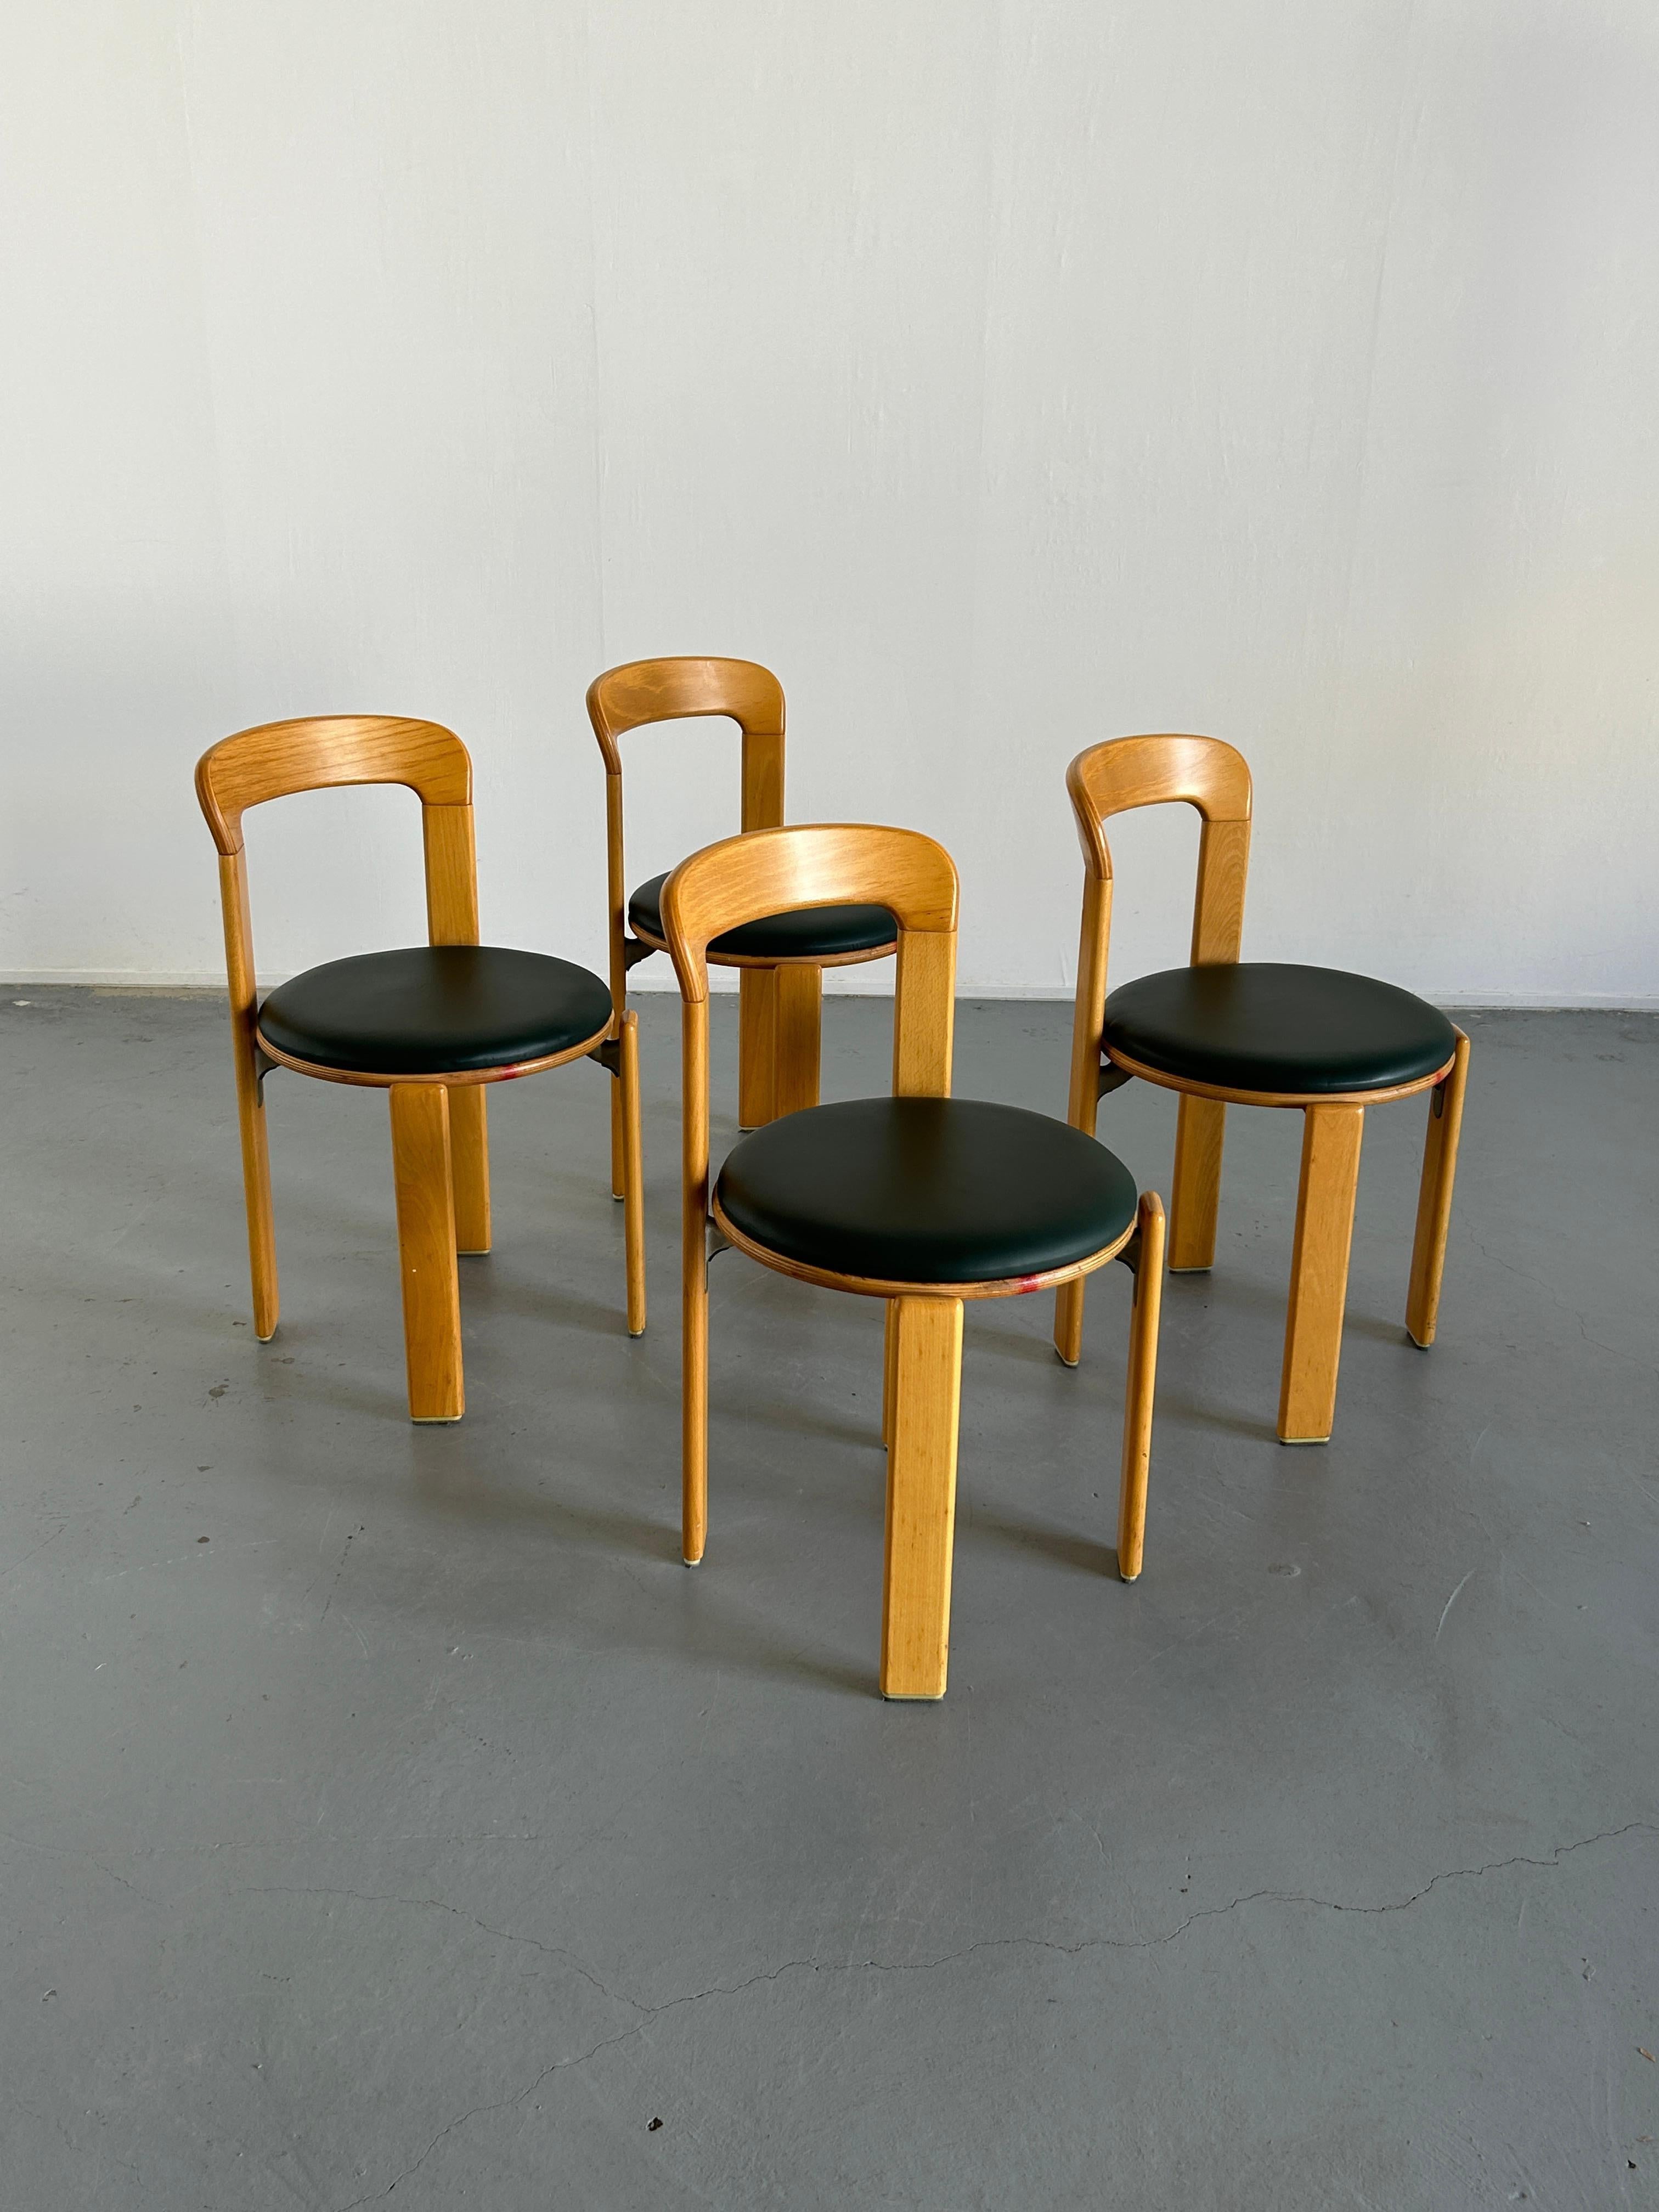 Set of four Mid-Century-Modern dining chairs designed by Bruno Rey in the 1970s. 
Iconic design, produced by the well known Germany manufacturer Kusch+Co in the early 1990s..

The dining chairs were made of solid beech, laminated plywood beech and